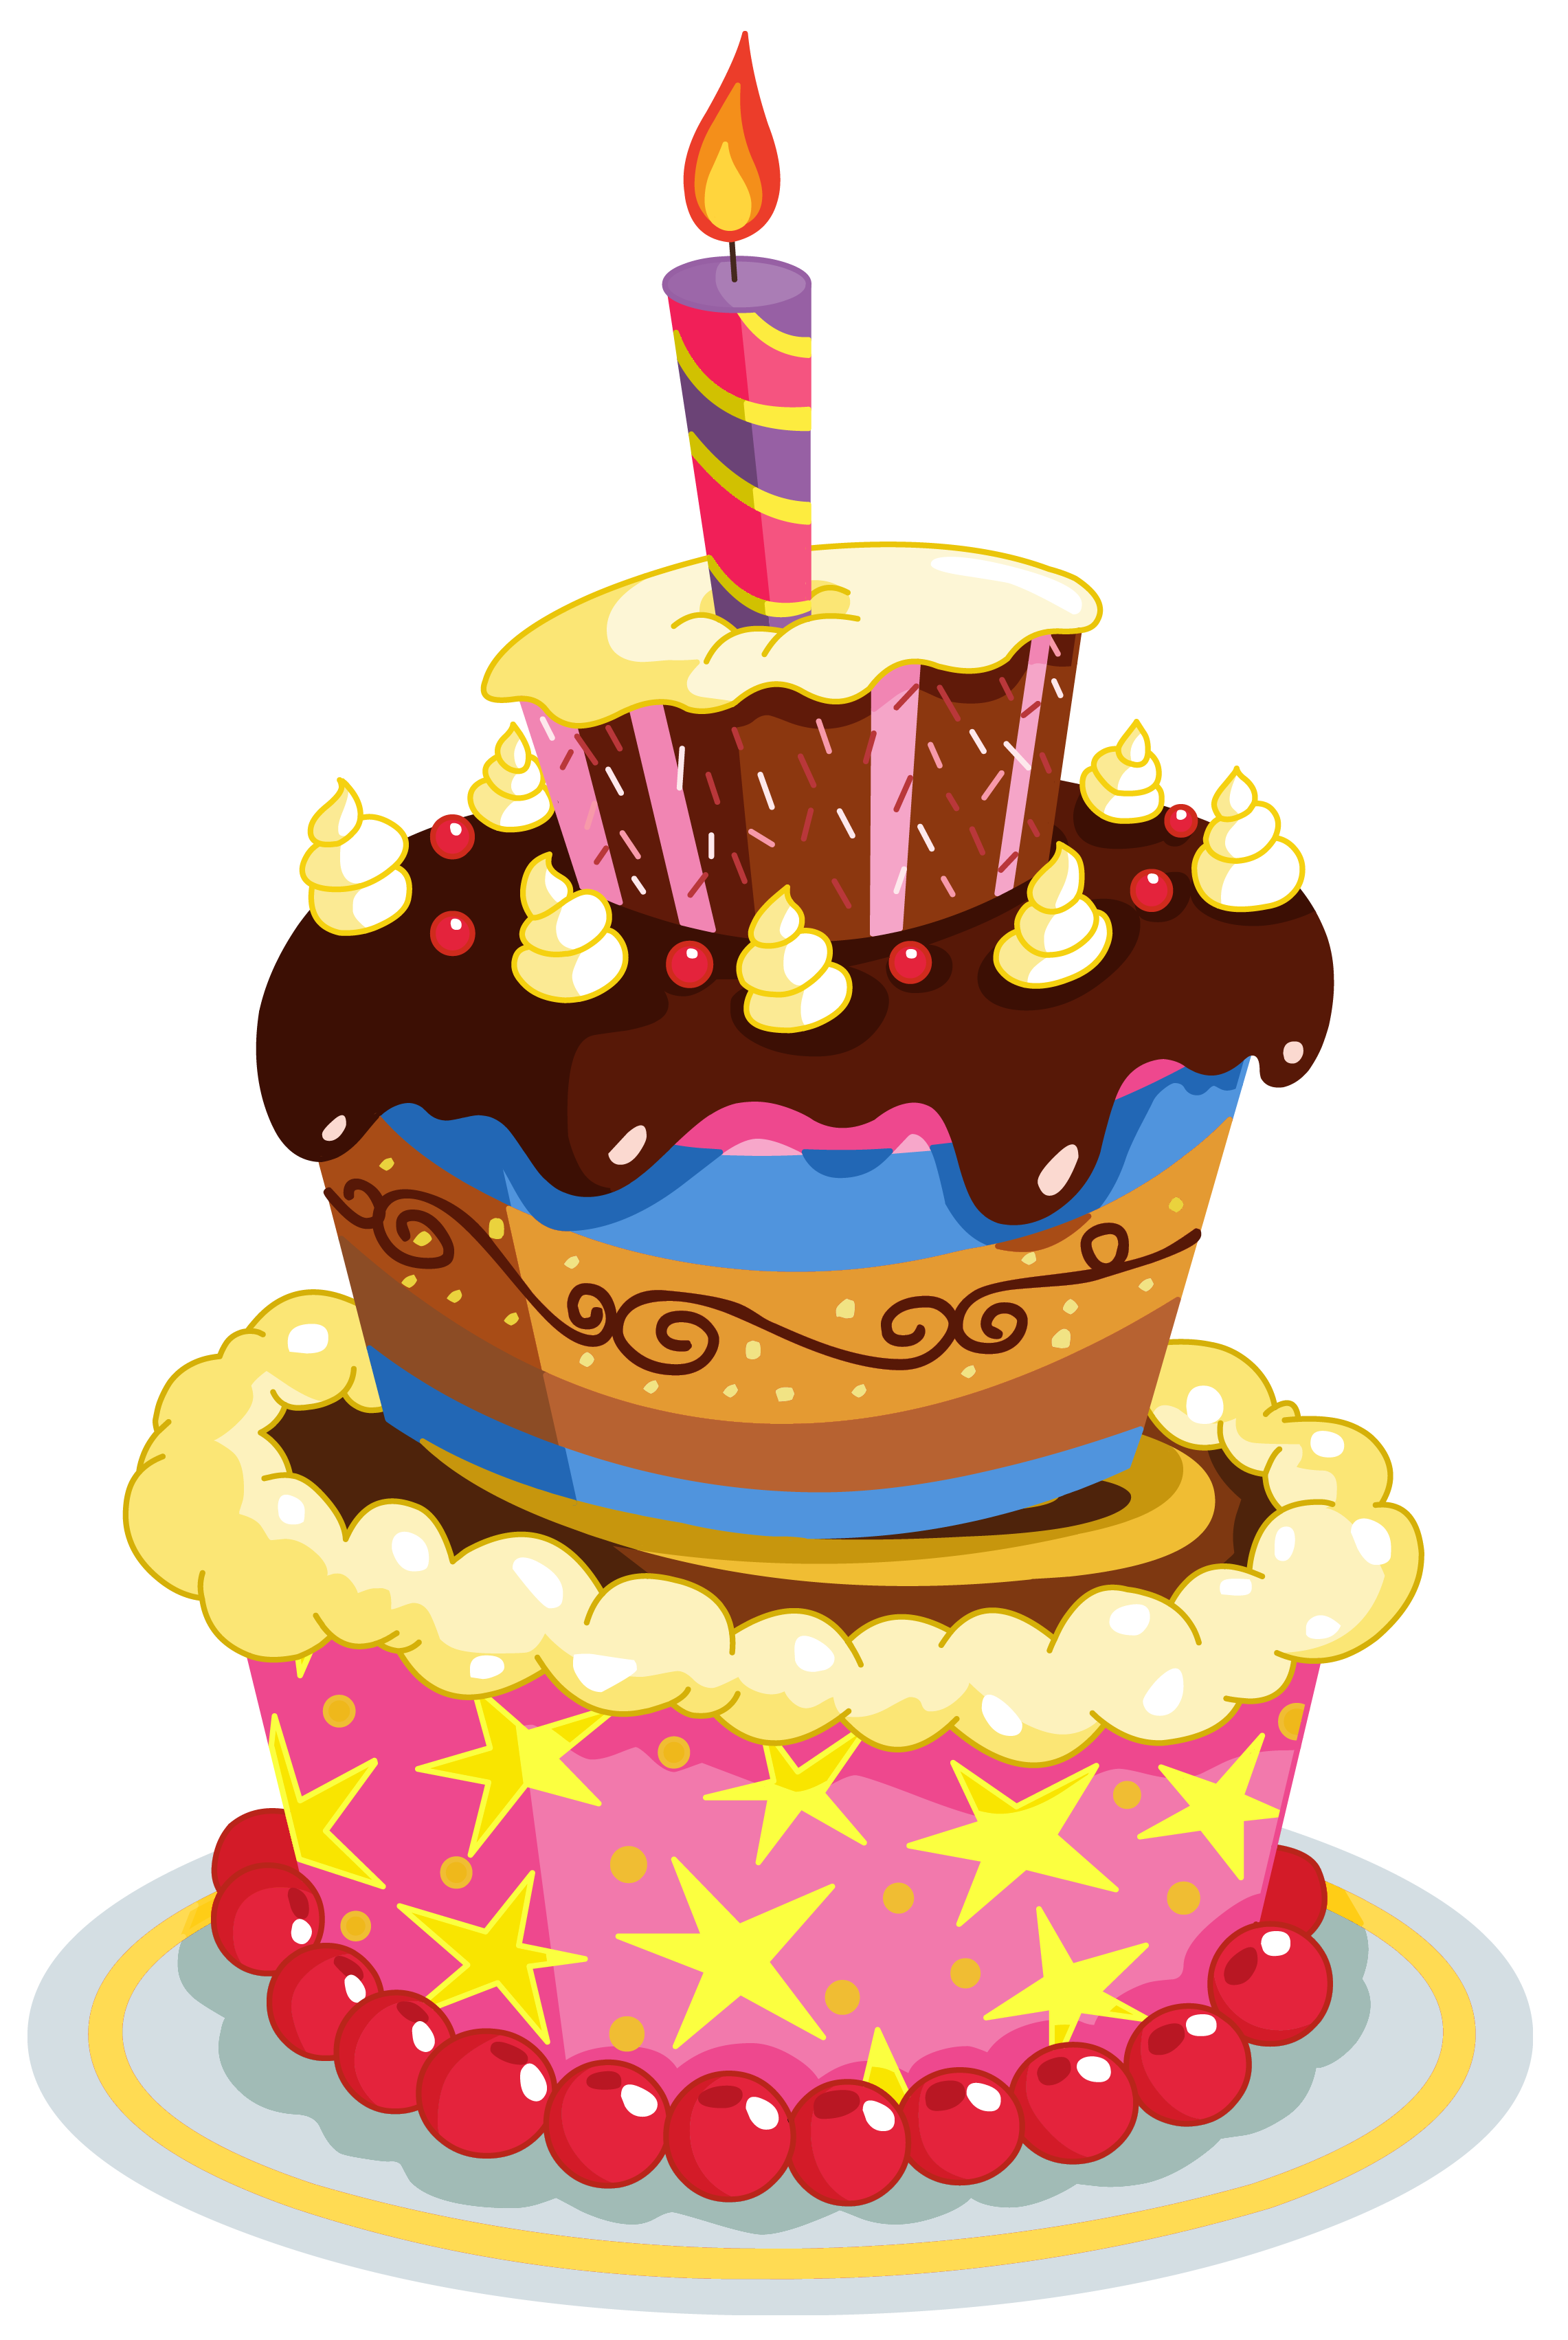 colorful birthday cake png clipart gallery yopriceville high quality images and transparent png free clipart colorful birthday cake png clipart